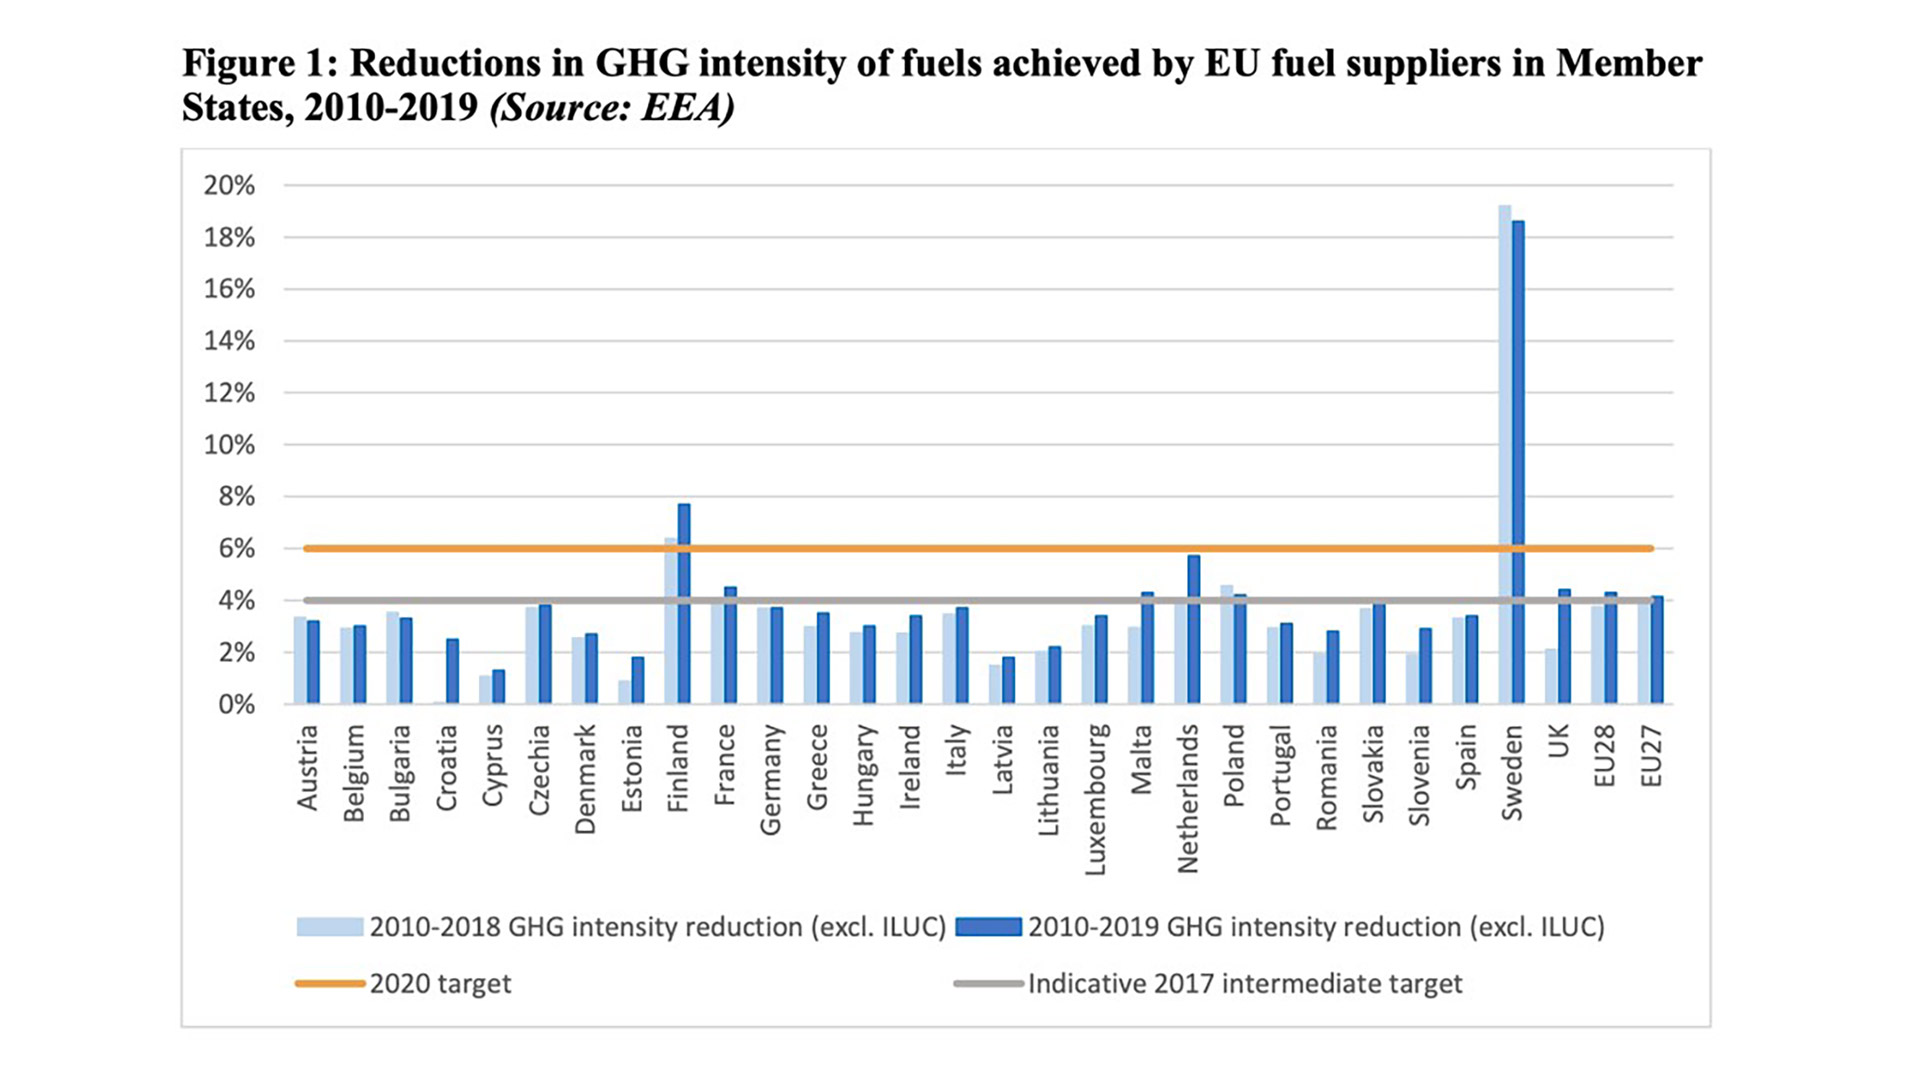 Reductions in GHG intensity of fuels achieved by EU fuel suppliers in Member States, 2010-2019 (Source: EEA). Foto: Print screen